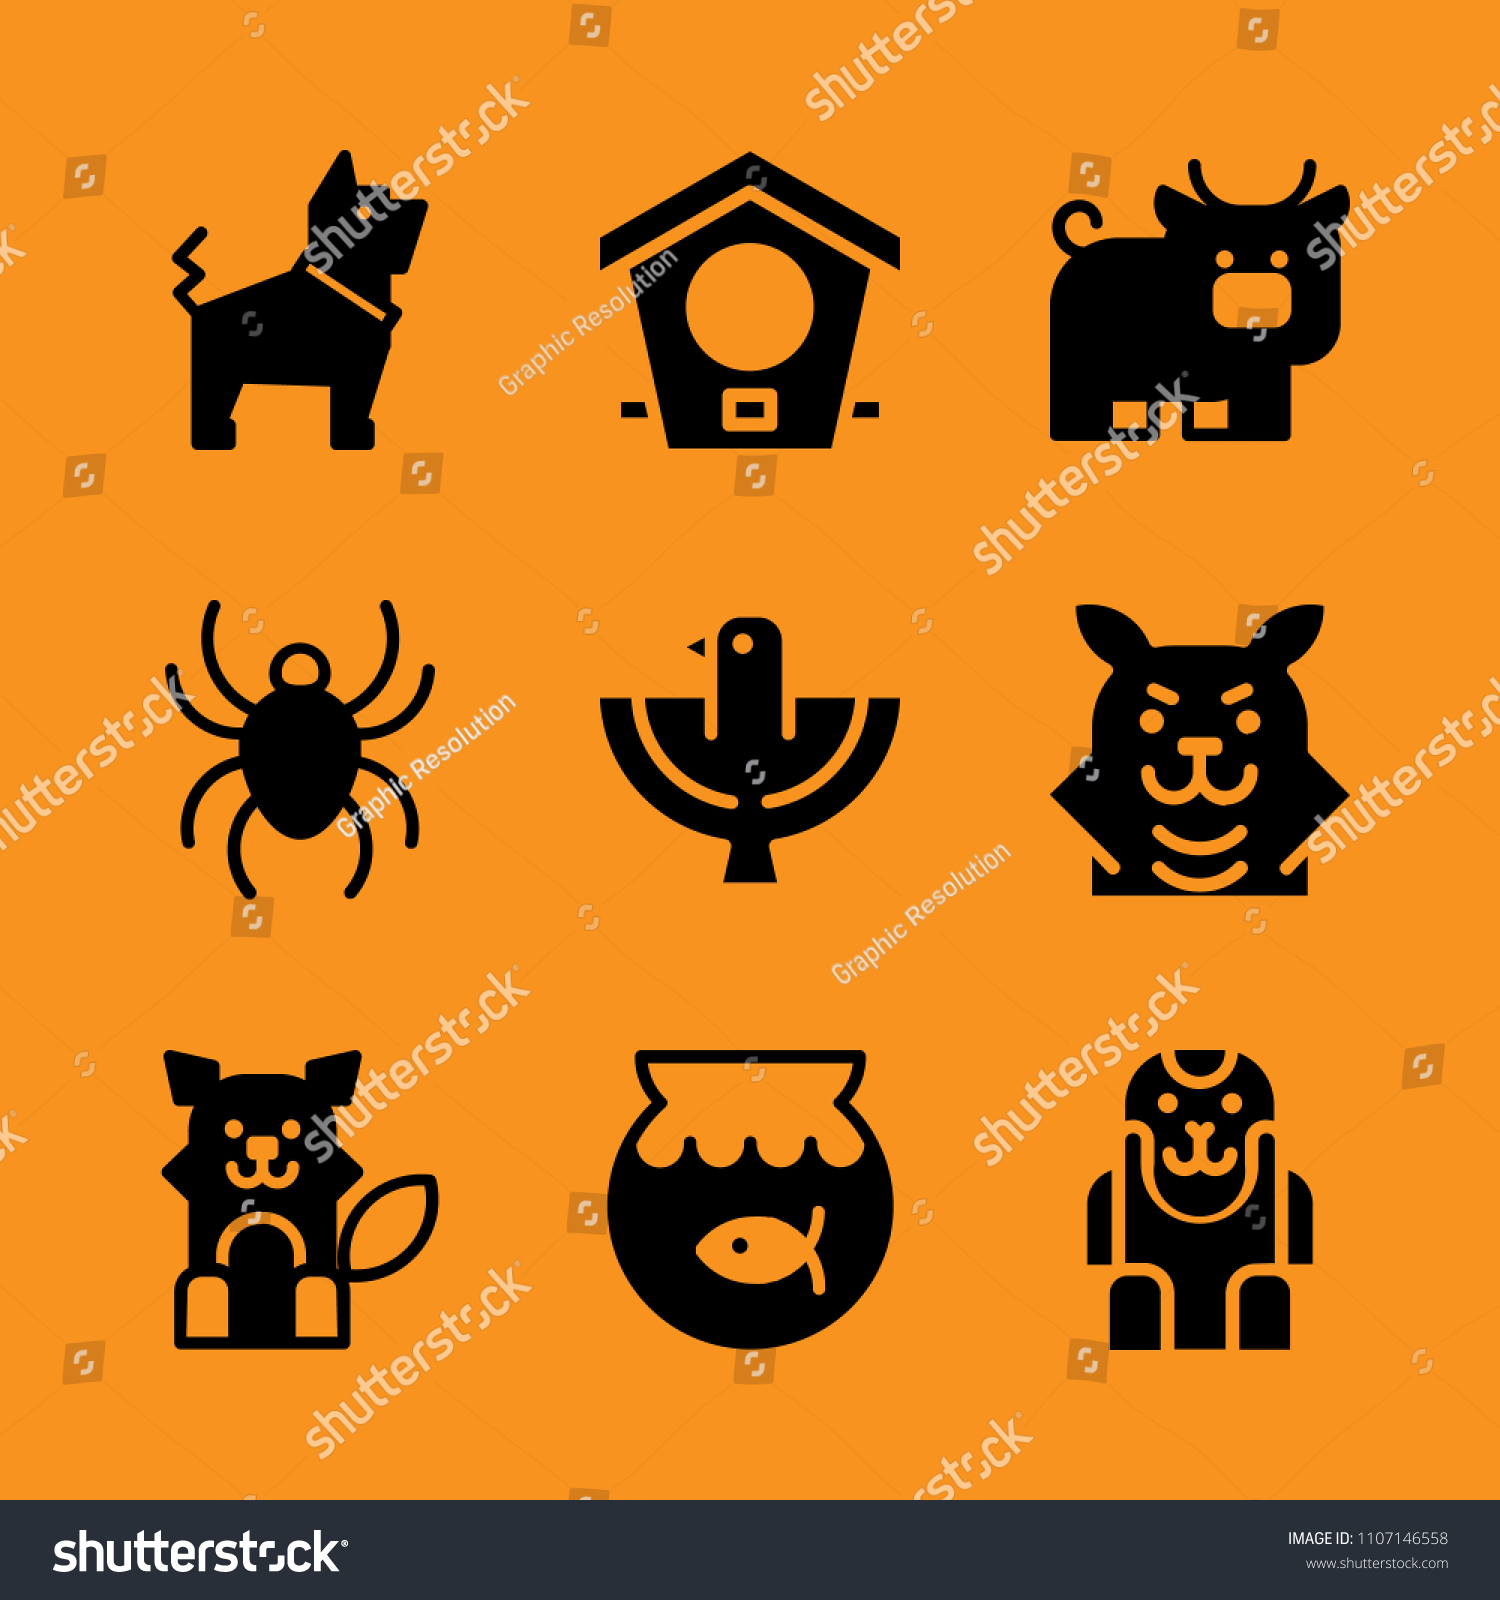 SVG of glass, cro-magnon, brown and zodiac icon set. Vector illustration for web and design. svg